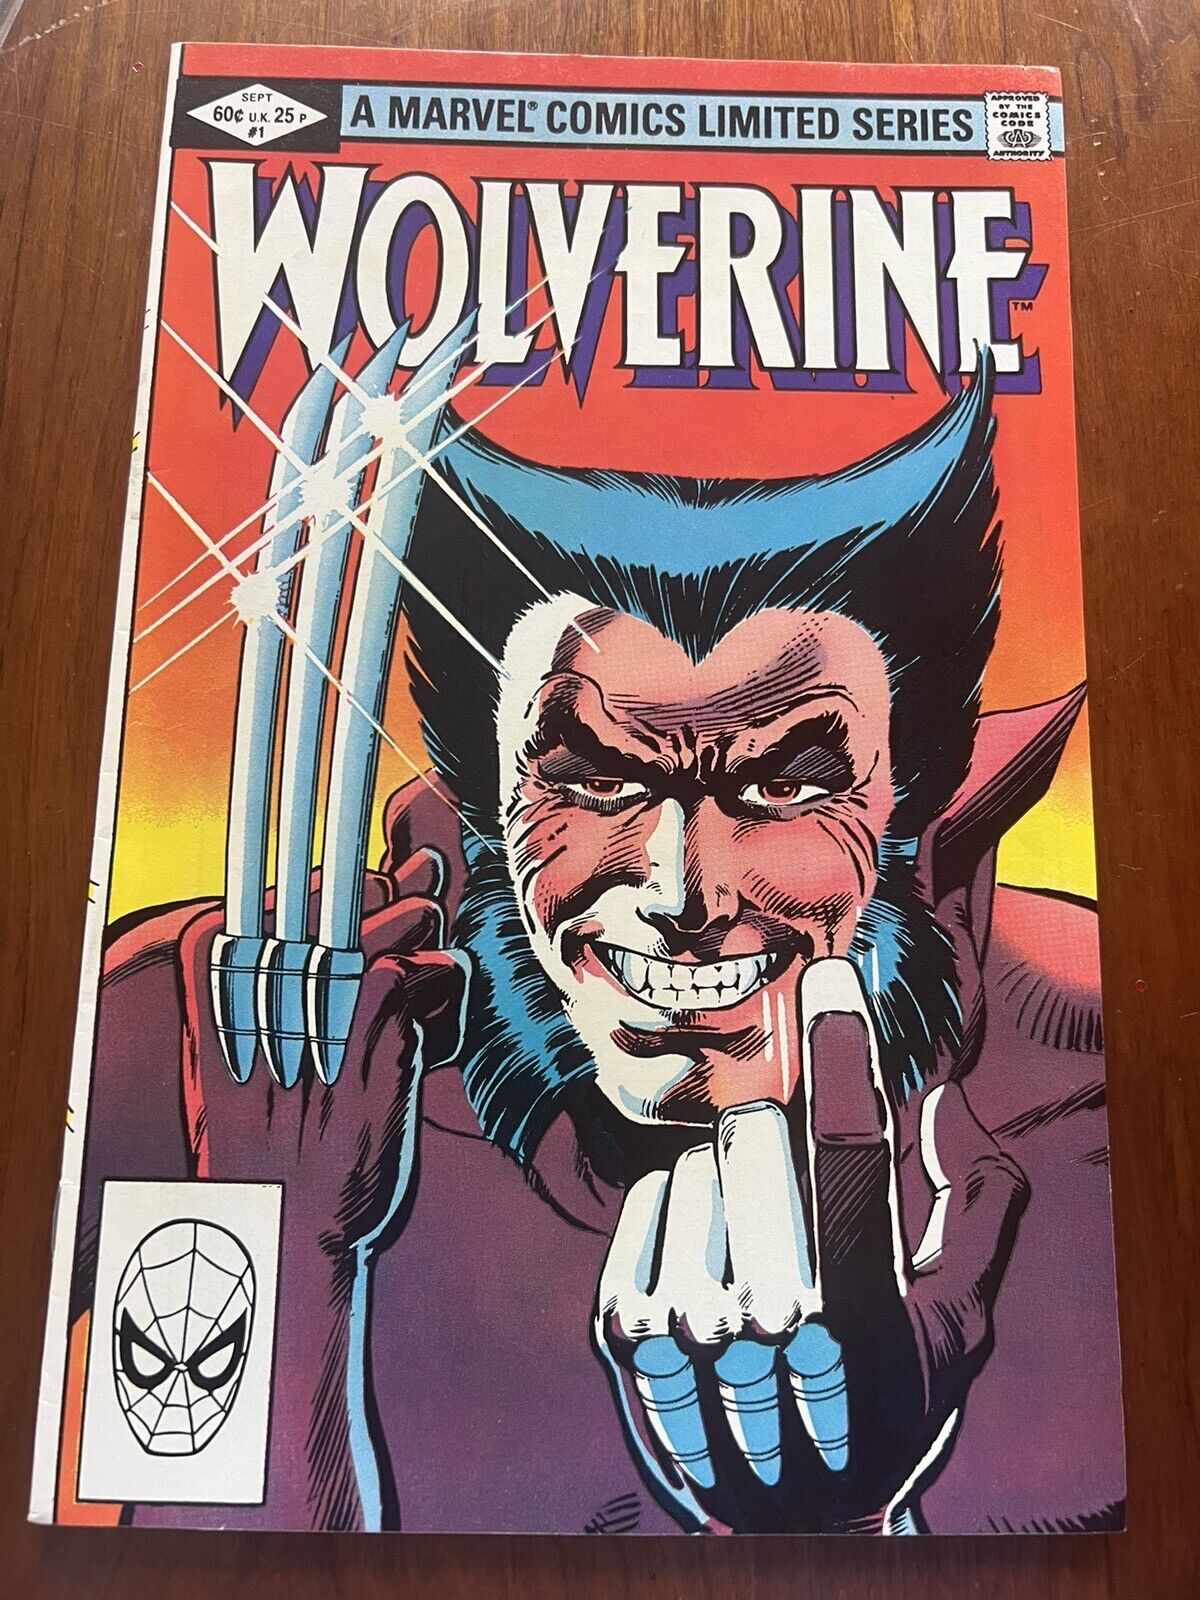 Wolverine #1 Limited Series. Signed By Frank Miller And Claremount